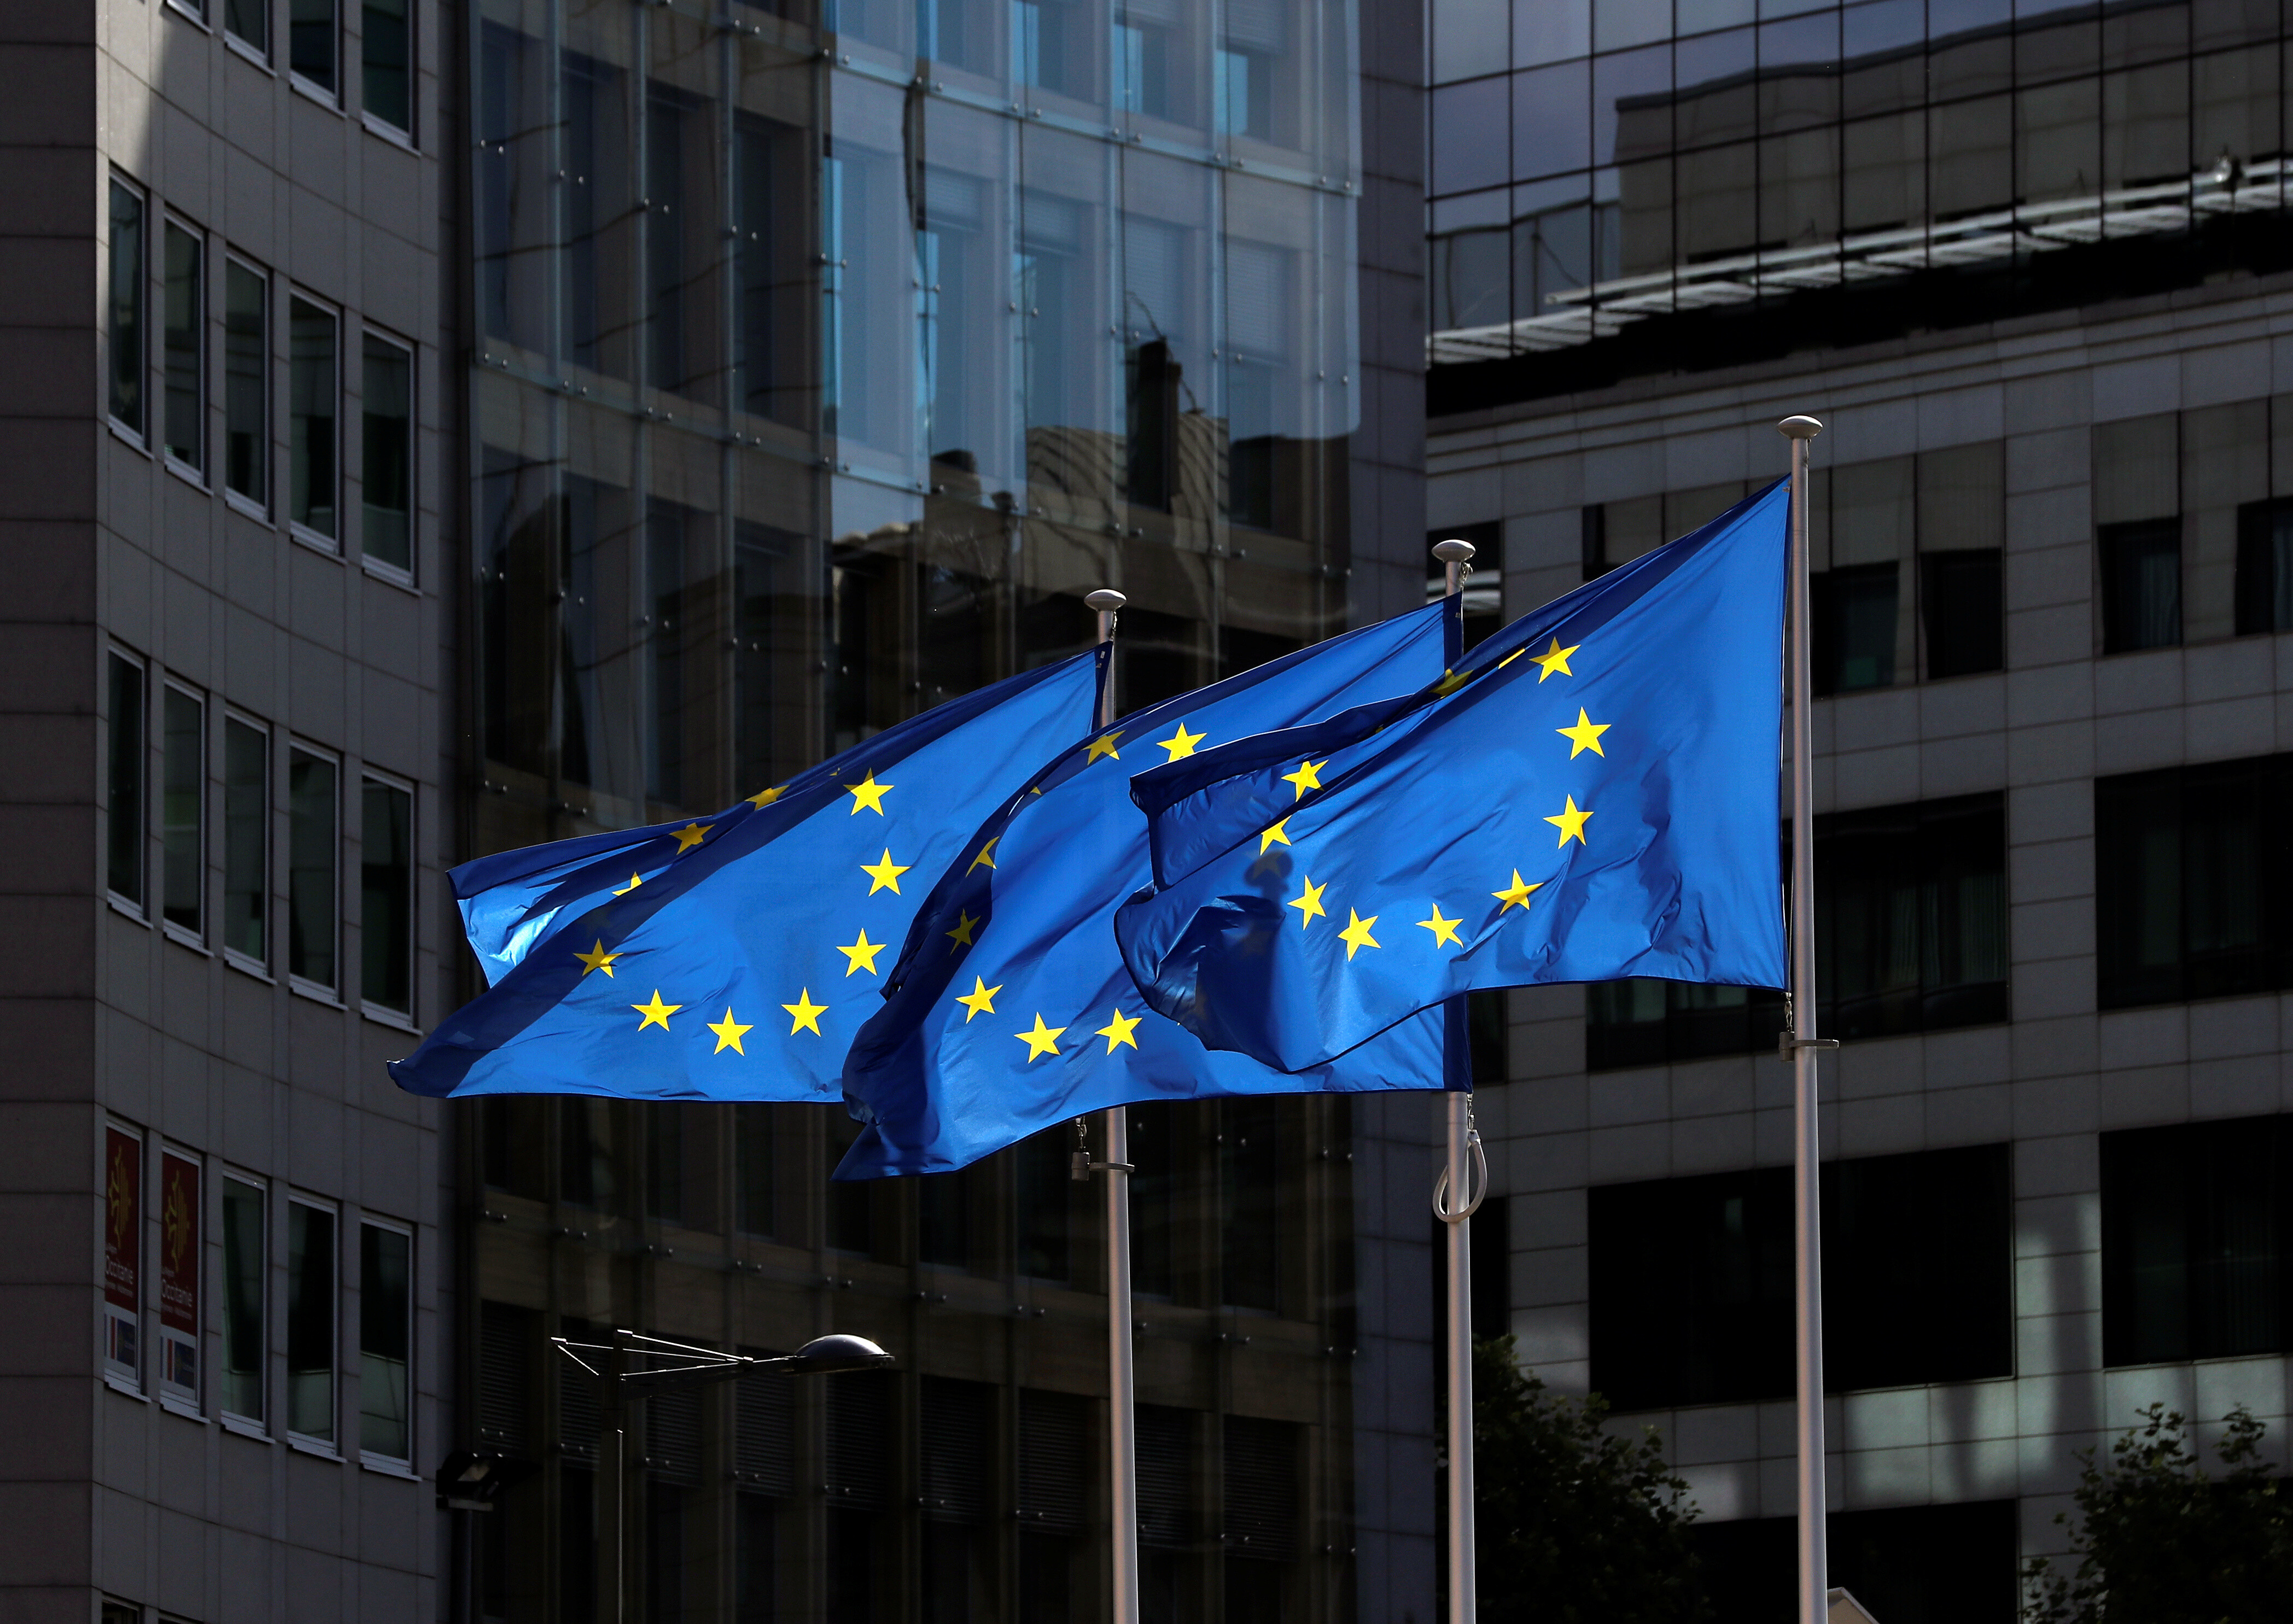 European Union flags flutter outside the European Commission headquarters in Brussels, Belgium August 21, 2020. REUTERS/Yves Herman